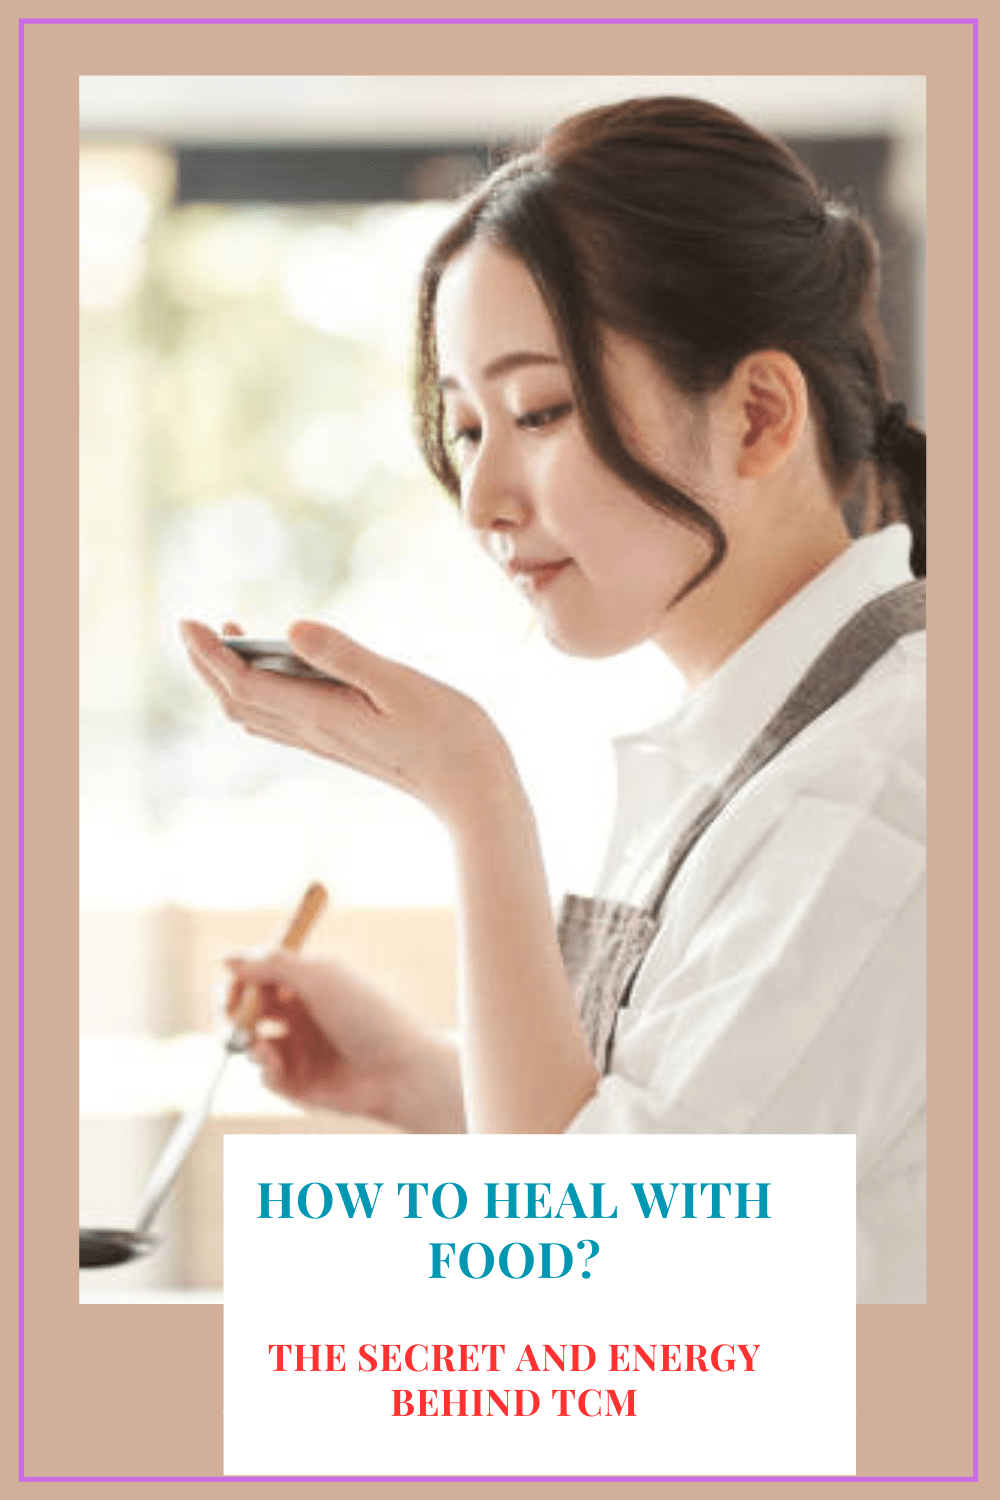 How-to-heal-with-foodThe-Secret-and-Energy-behind-TCM-pinterest-pin